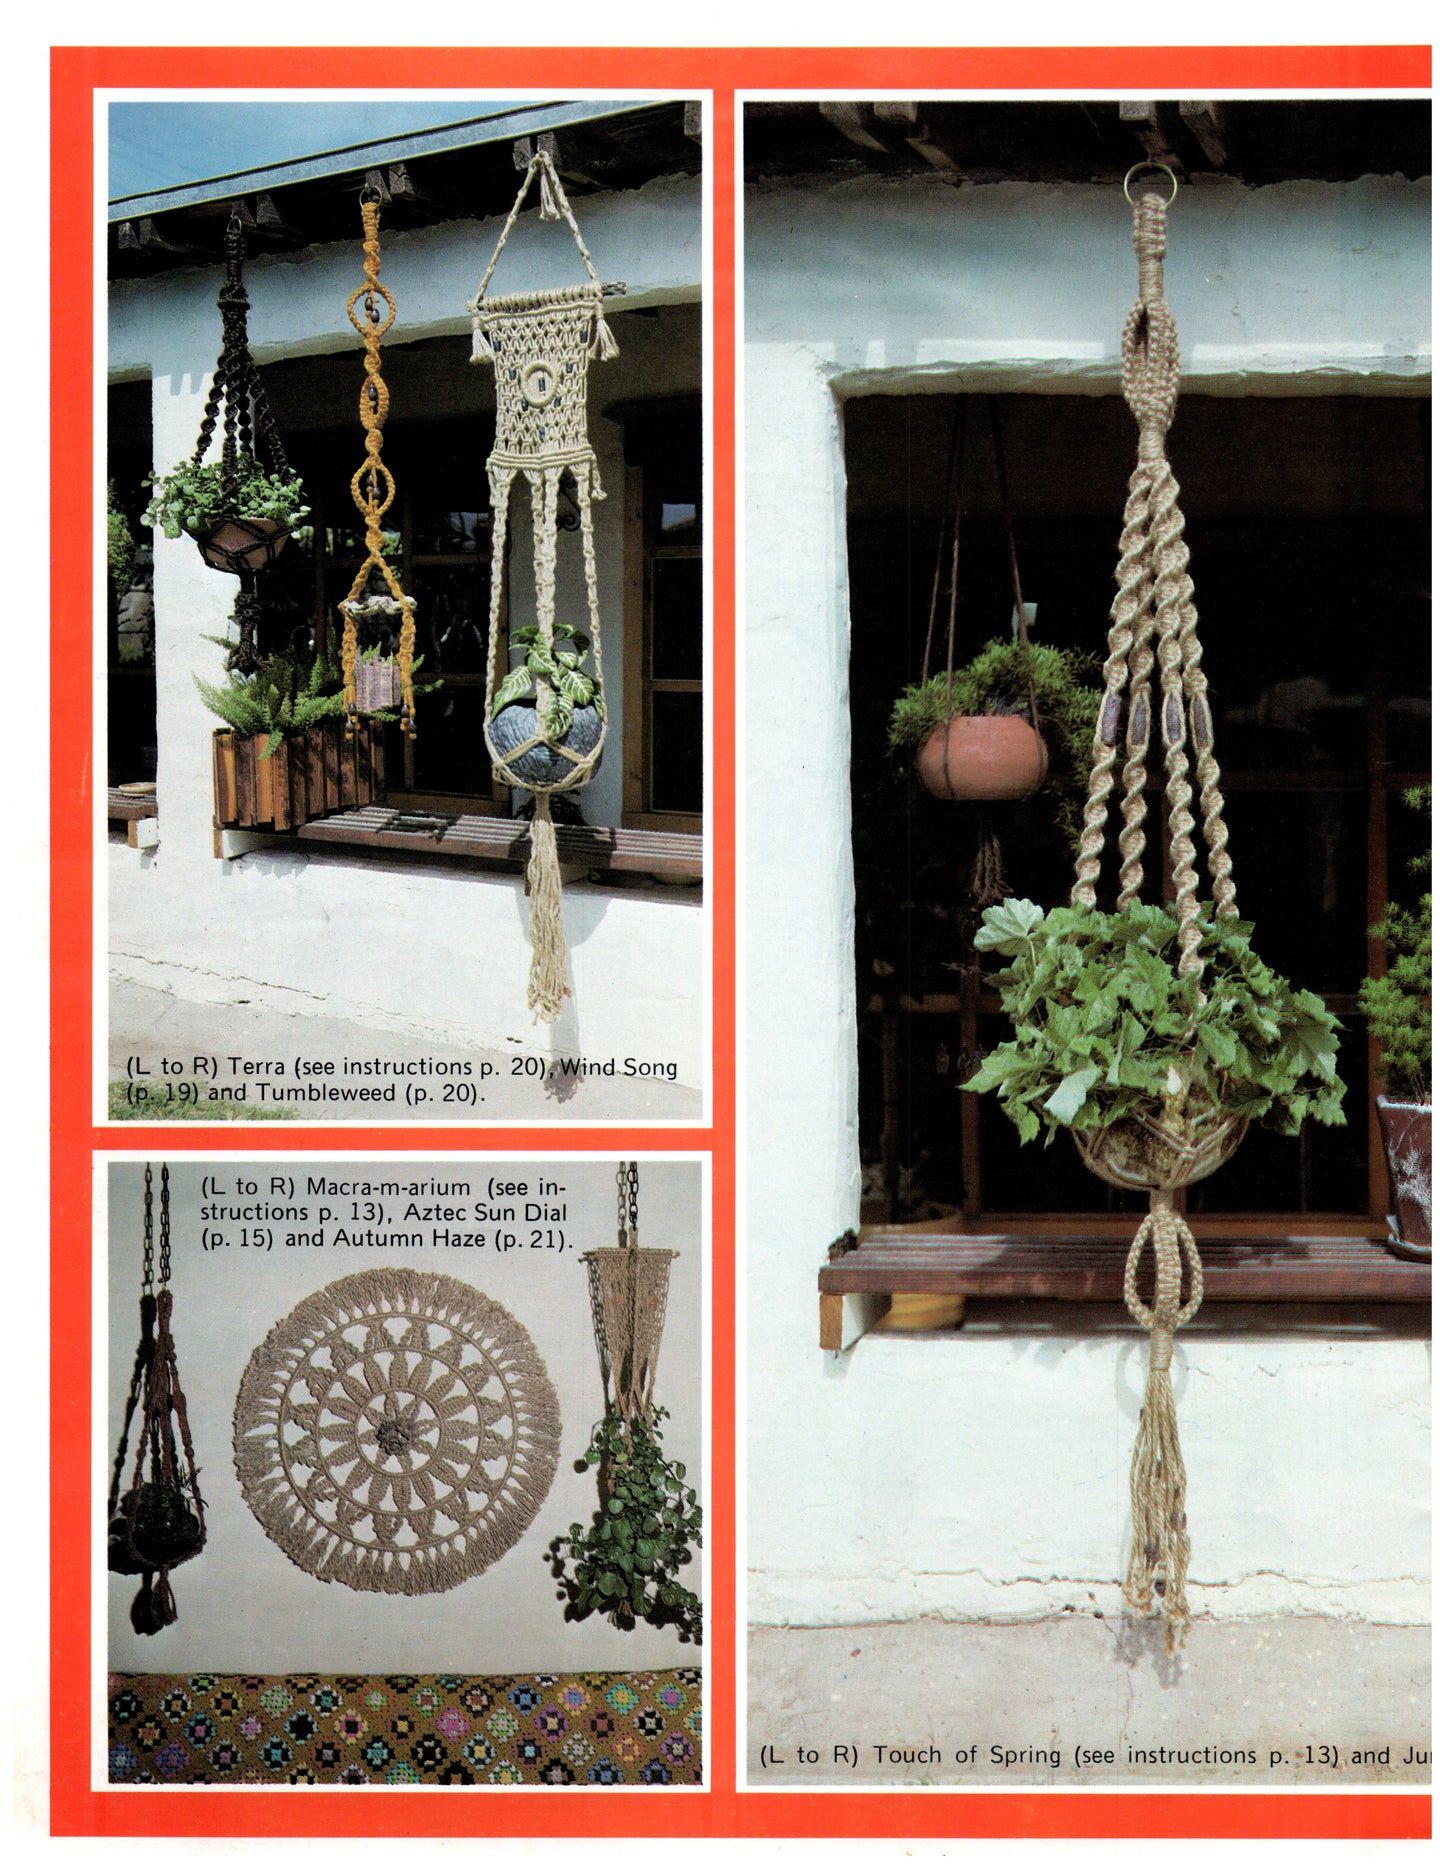 Macrame Hangers Patterns Plant Holders Hangings Knots Knotted Weaving Download PDF Instructions Home Decorating - At Grandma's Table